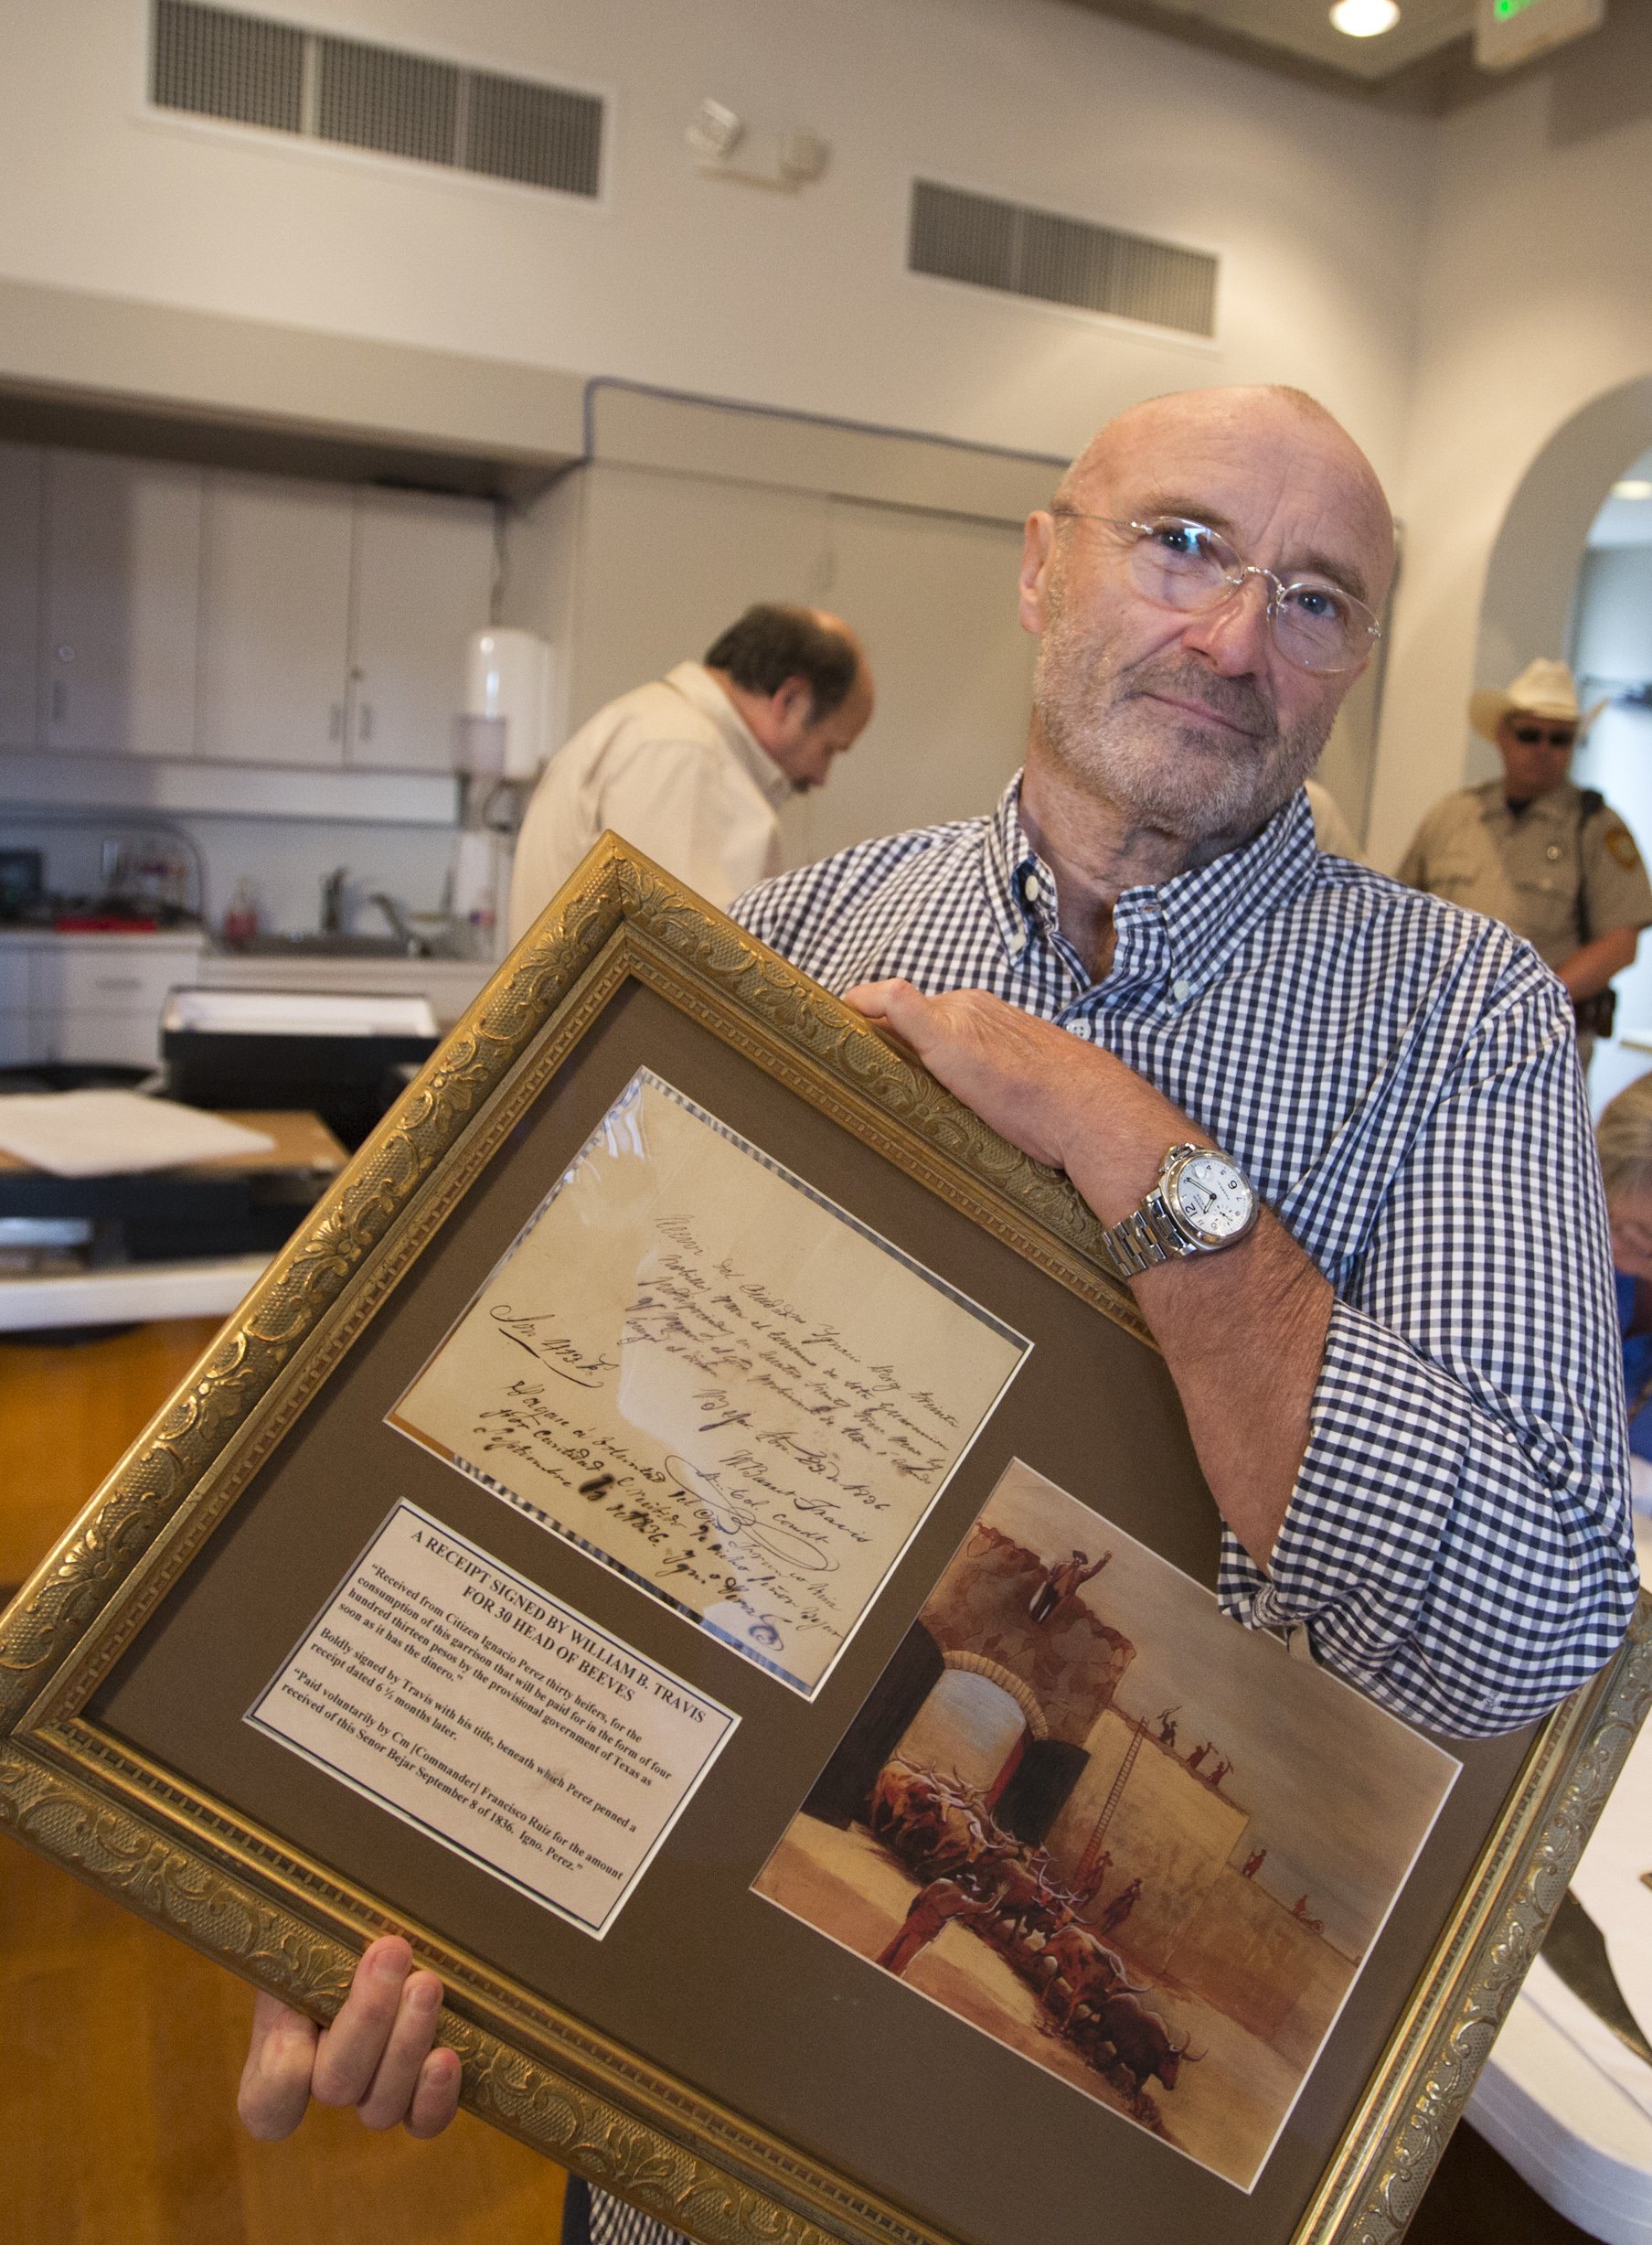 British music legend, Phil Collins donates what is considered the biggest collection of Alamo artifacts to the people of Texas on Oct. 28, 2014.